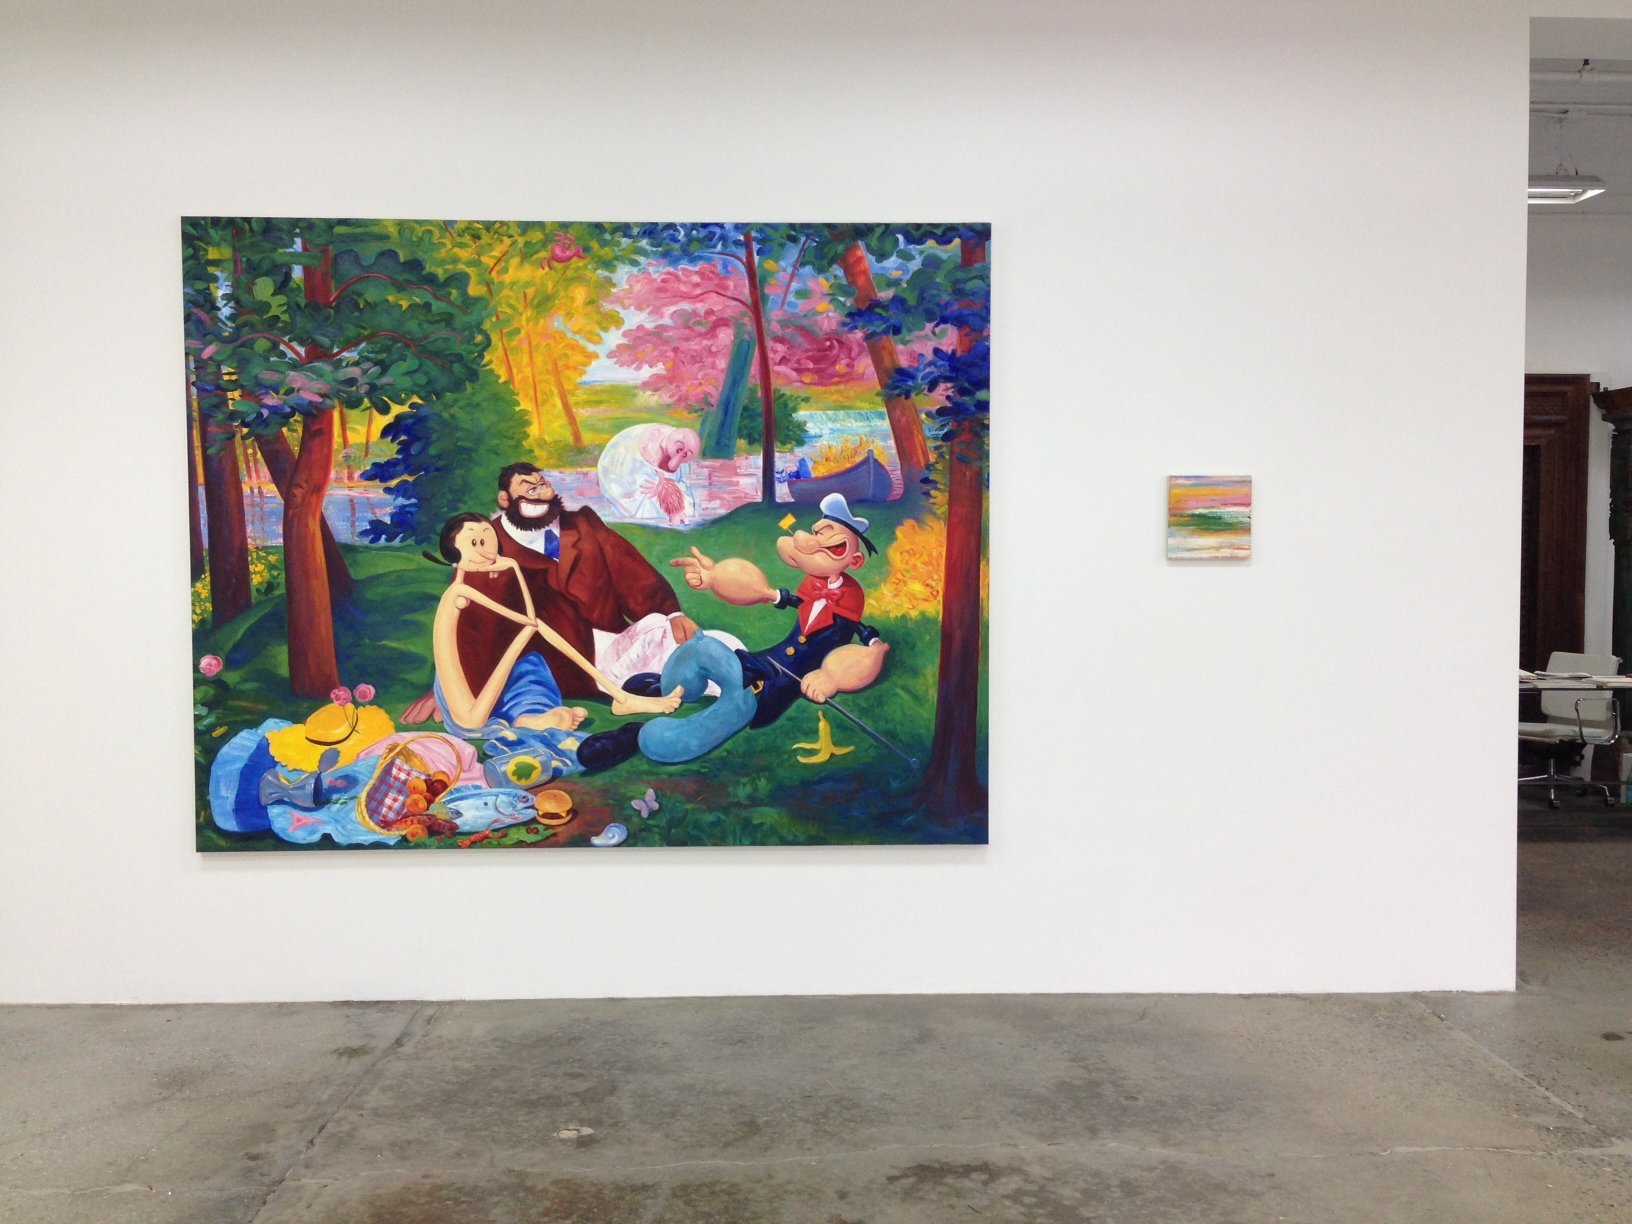 Andre von morisse PICNIC by Edouard Manaet as seen at Silas von Morisse Gallery 2014.JPG